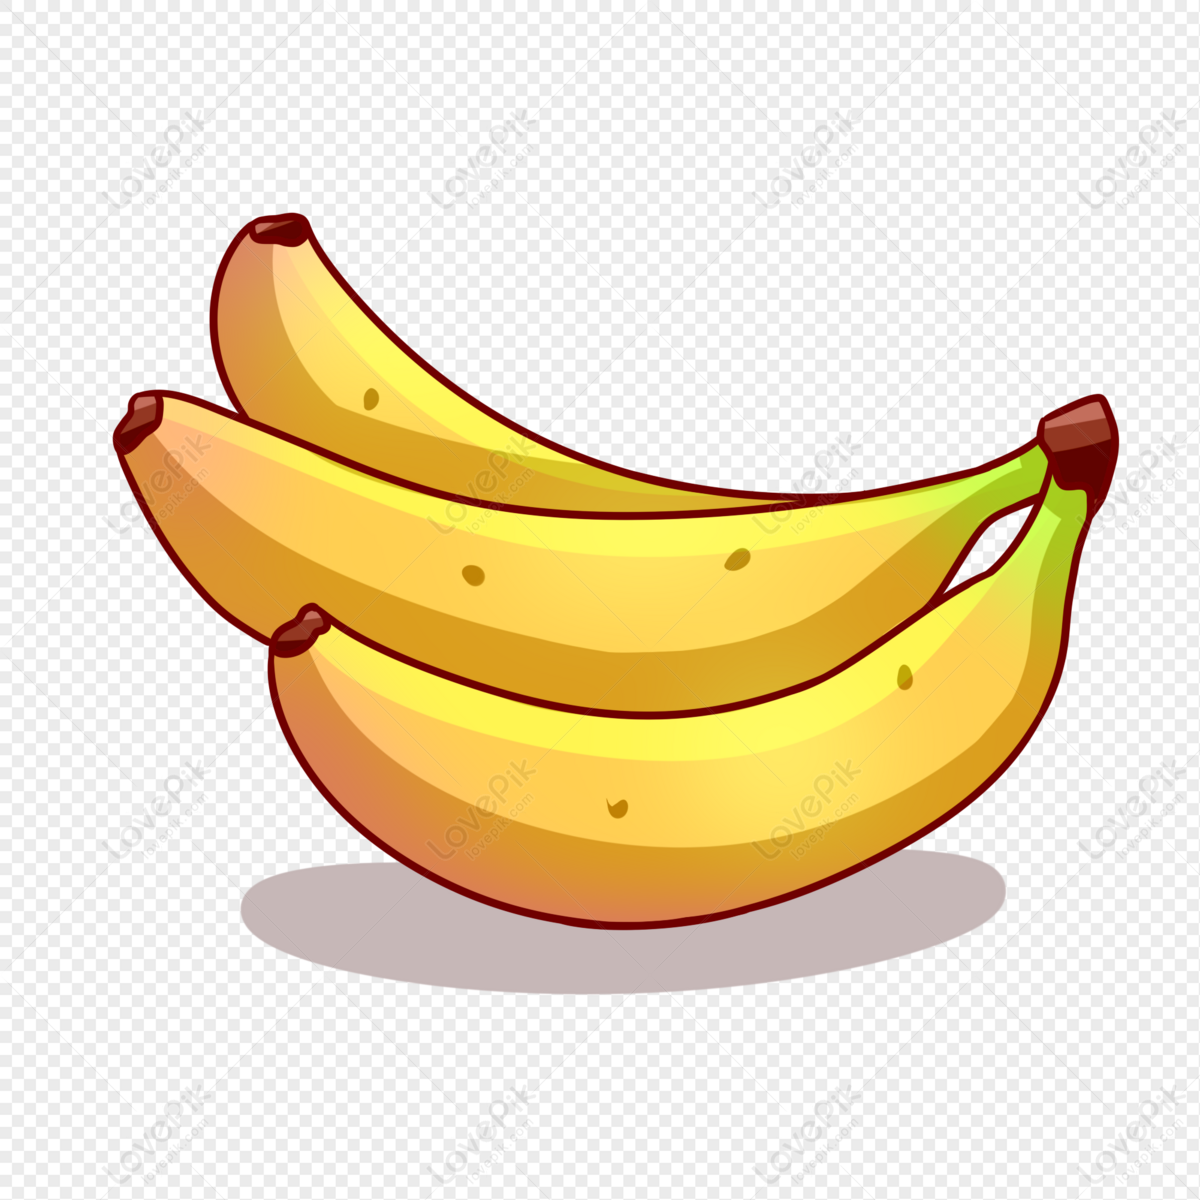 Cartoon Banana PNG Image and PSD File For Free Download - Lovepik